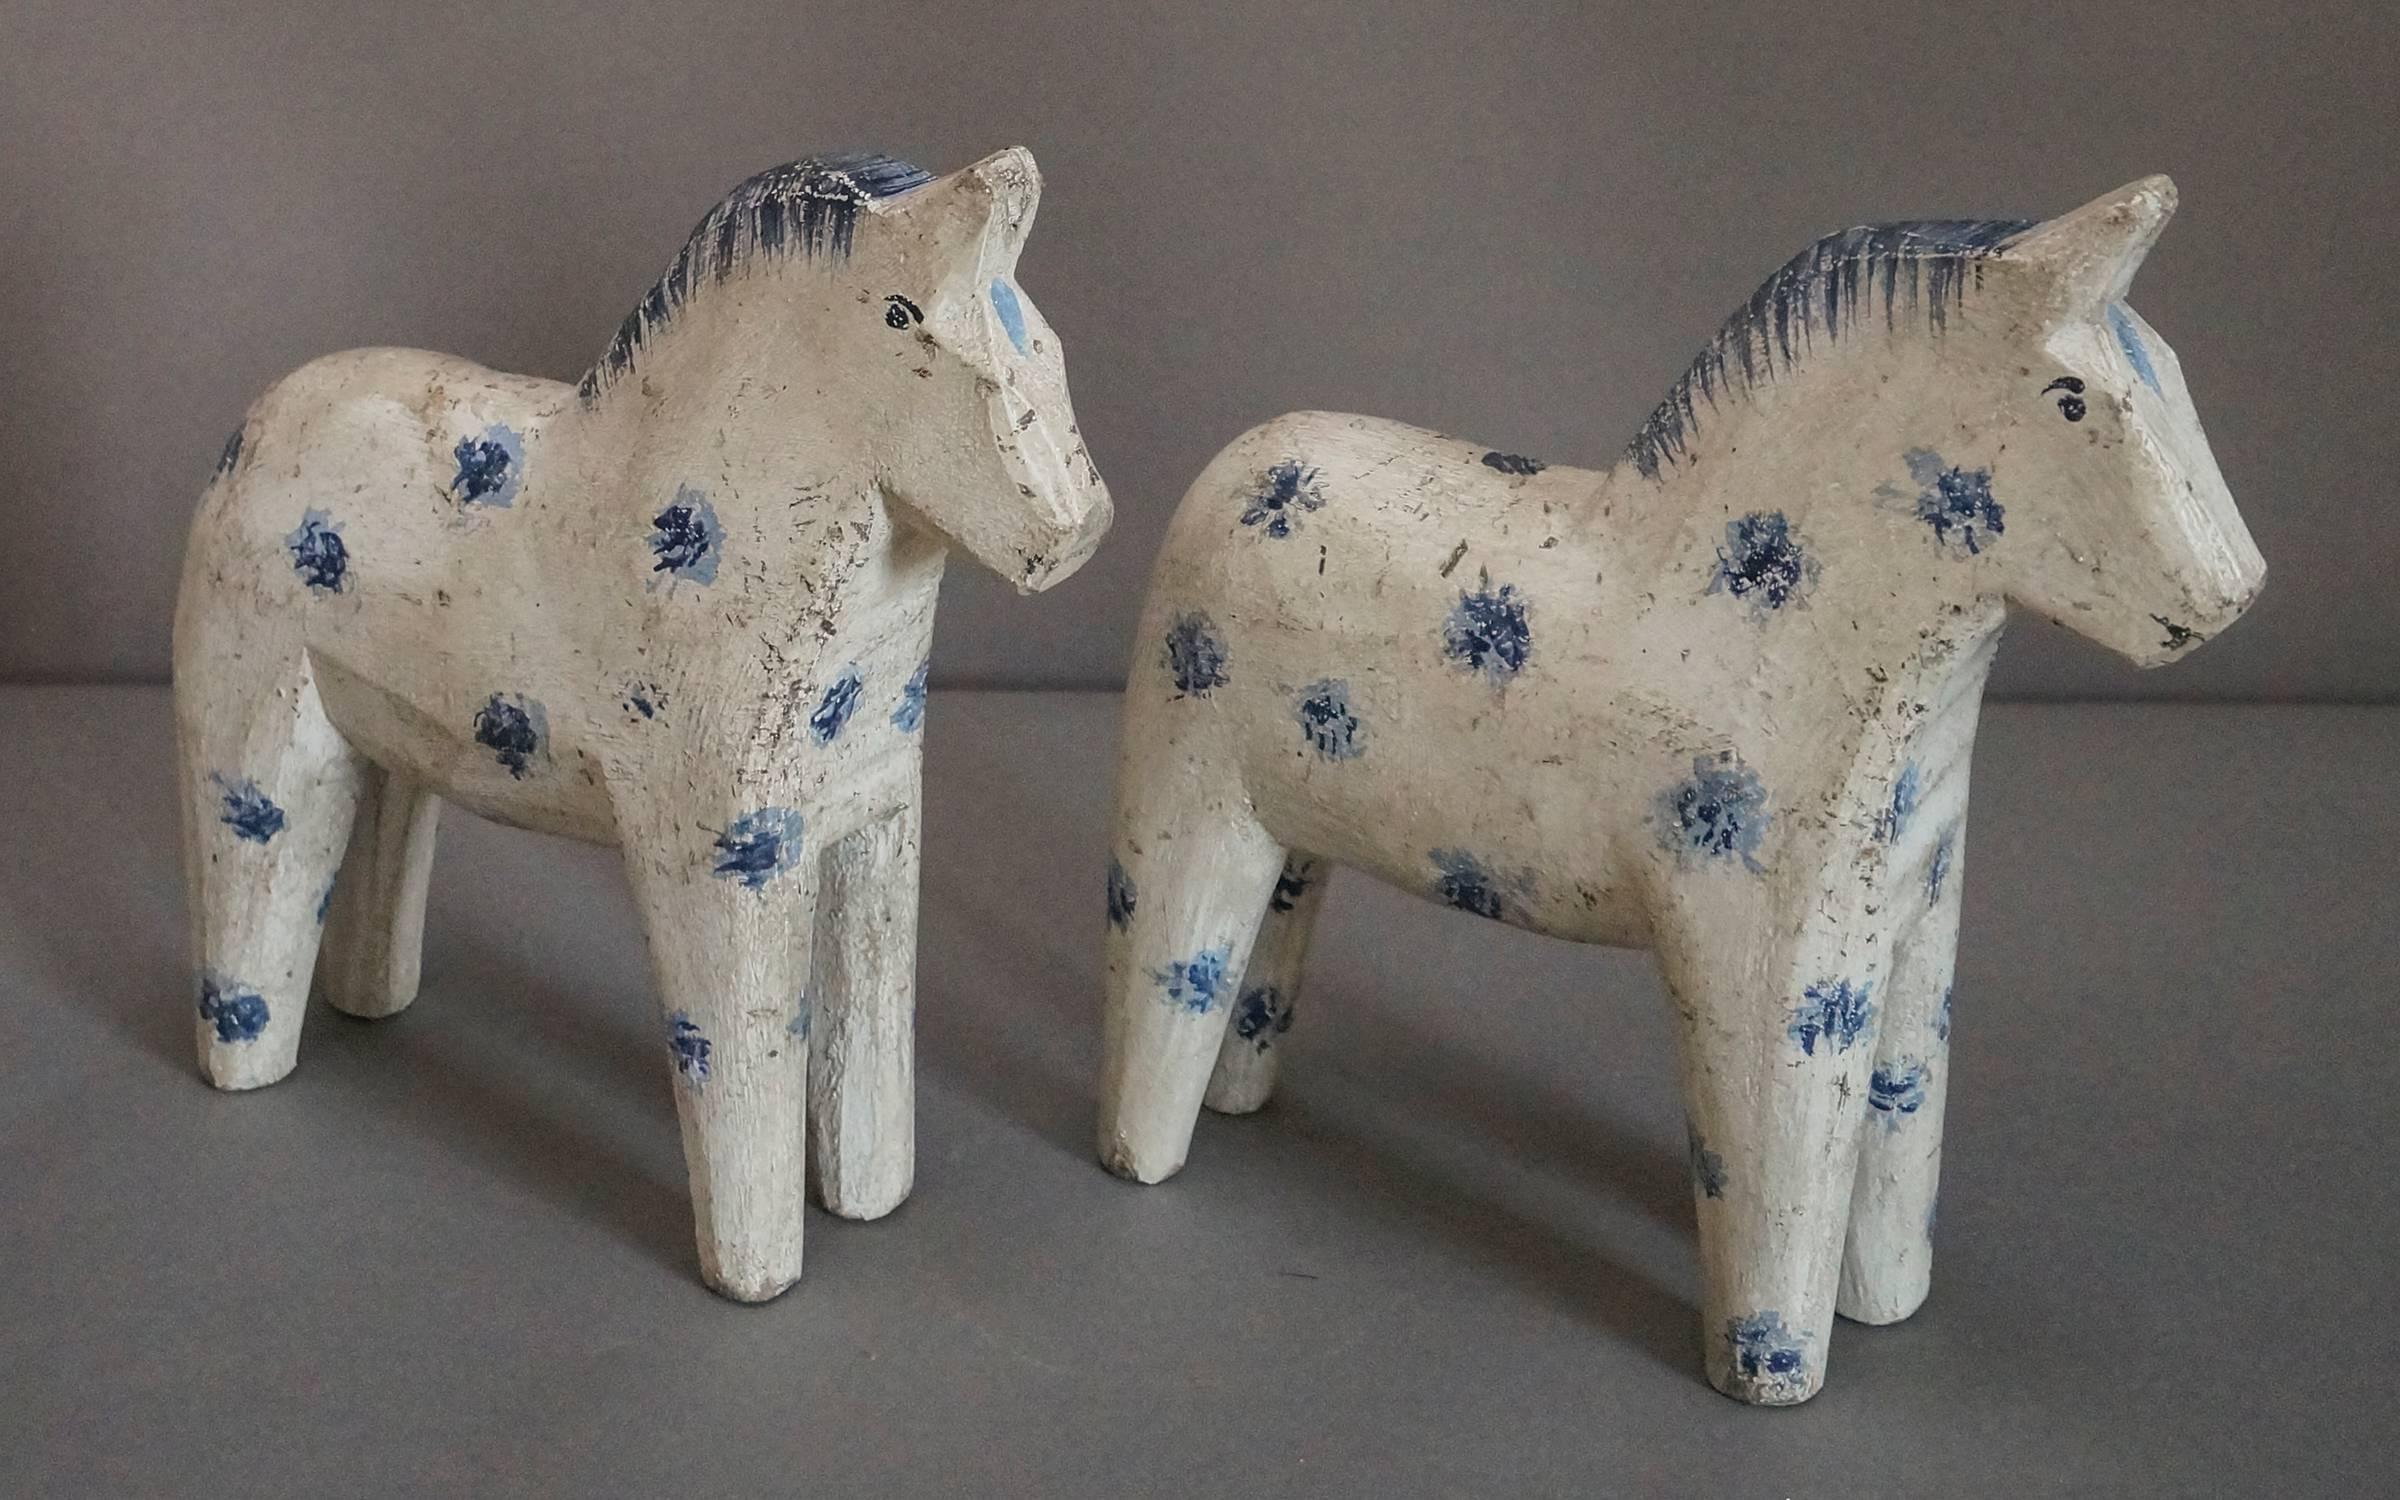 Pair of Dalecarlian (Dala) horses, Sweden circa 1910, in original white paint. Separated ears, and feathered manes.